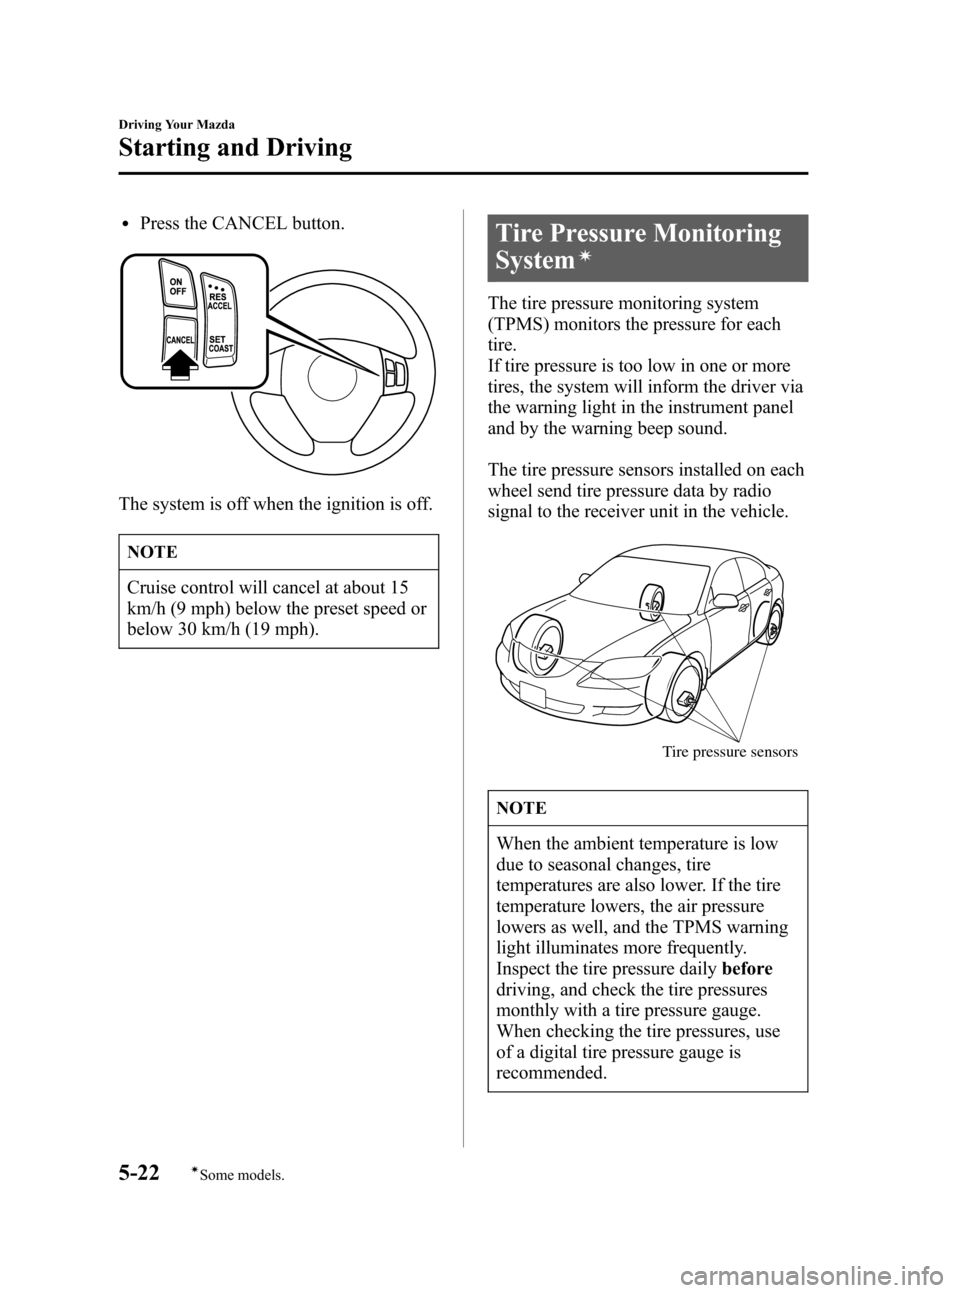 MAZDA MODEL 3 HATCHBACK 2006  Owners Manual (in English) Black plate (136,1)
lPress the CANCEL button.
The system is off when the ignition is off.
NOTE
Cruise control will cancel at about 15
km/h (9 mph) below the preset speed or
below 30 km/h (19 mph).
Tir